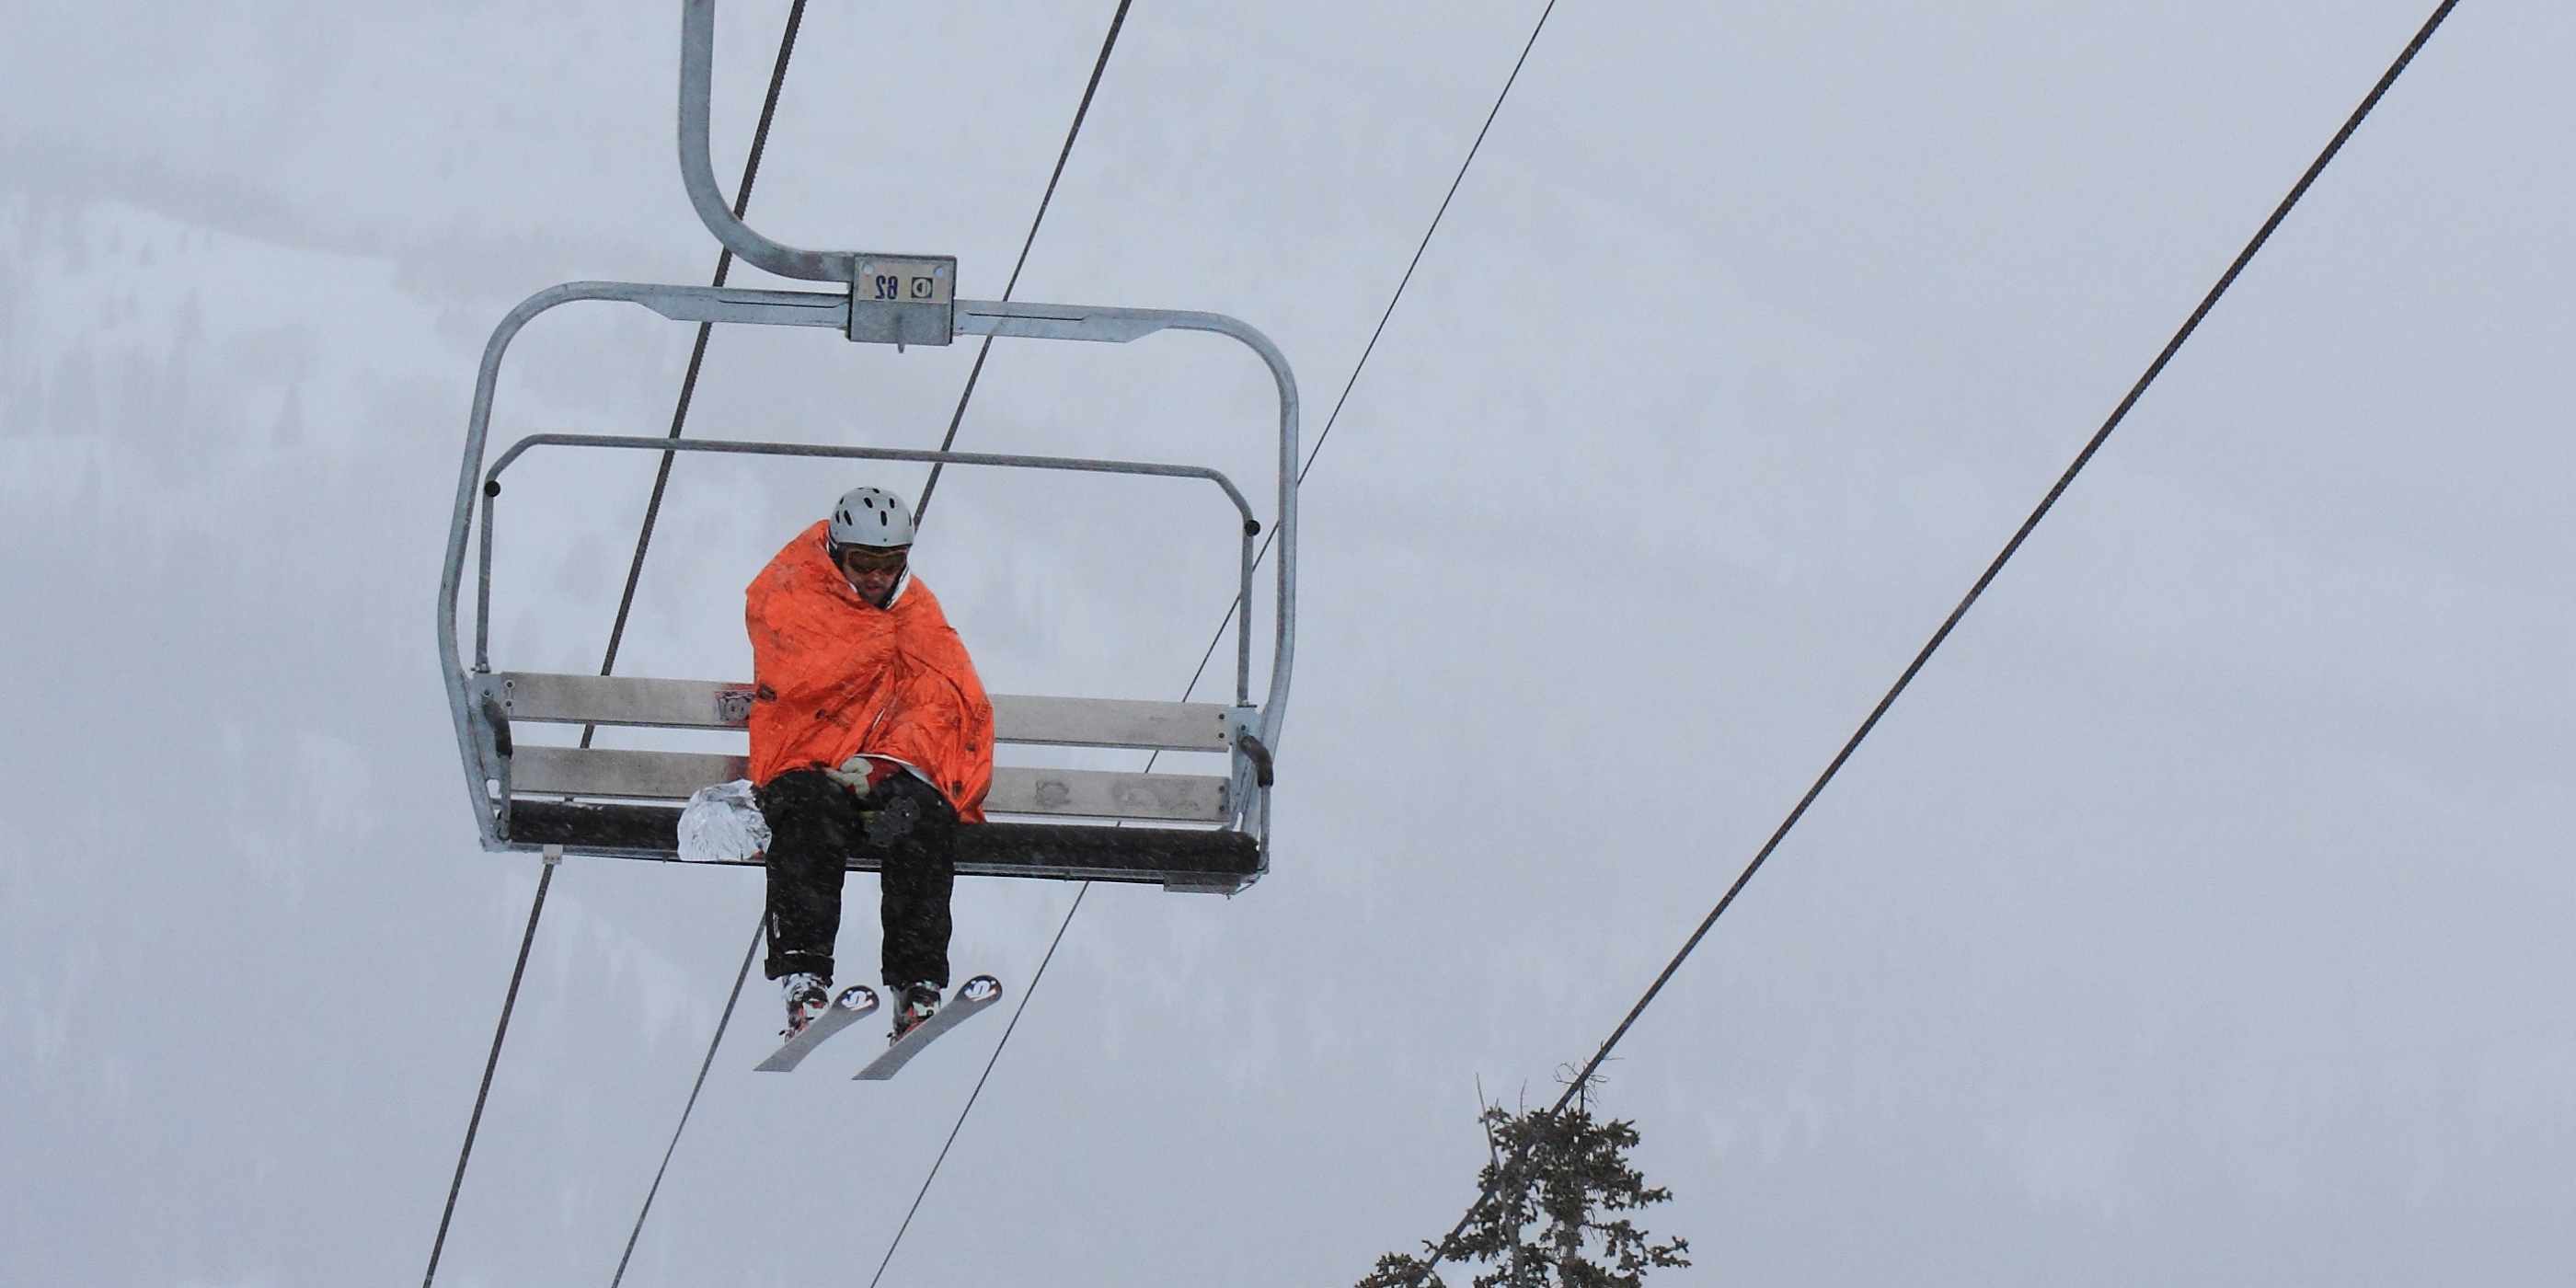 Skier Sitting on Chairlift Wrapped in Orange SOL Emergency Bivvy XL Against a White Sky